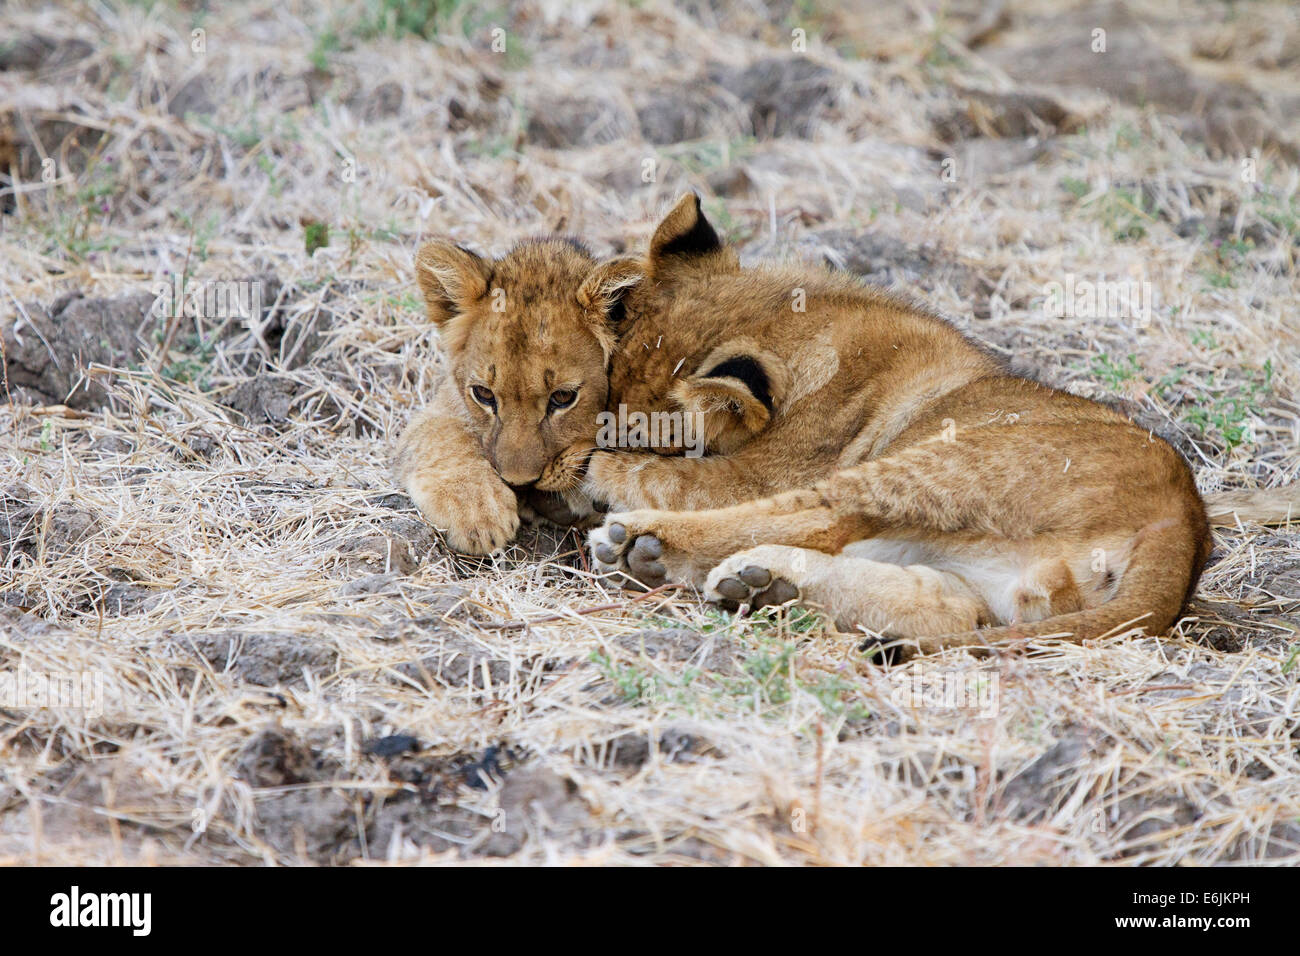 Lion cubs playing together, Zambia, Africa Stock Photo